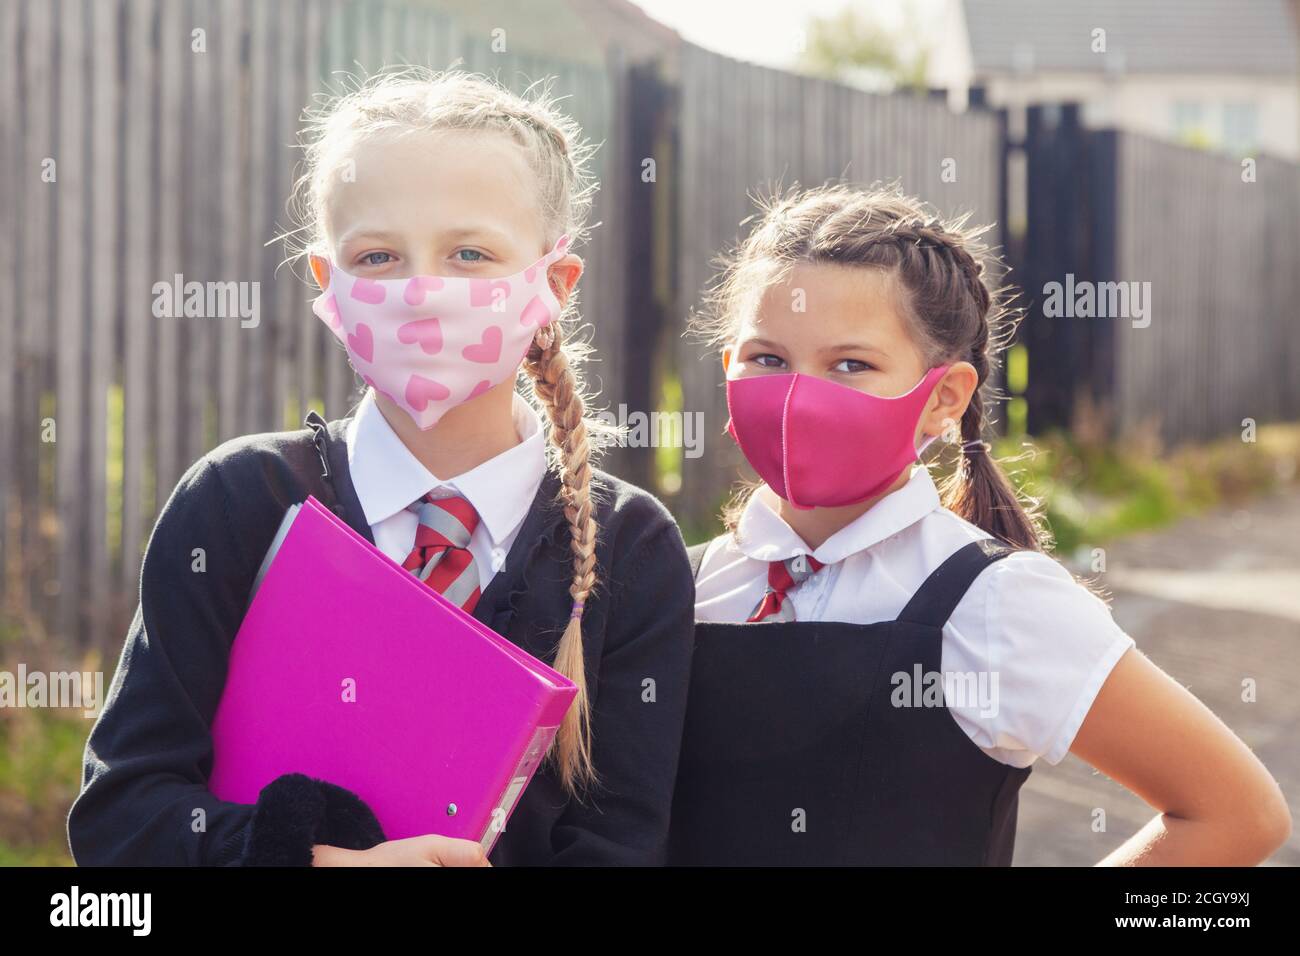 Two ten year old schoolgirls in school uniforms and wearing face masks. Stock Photo